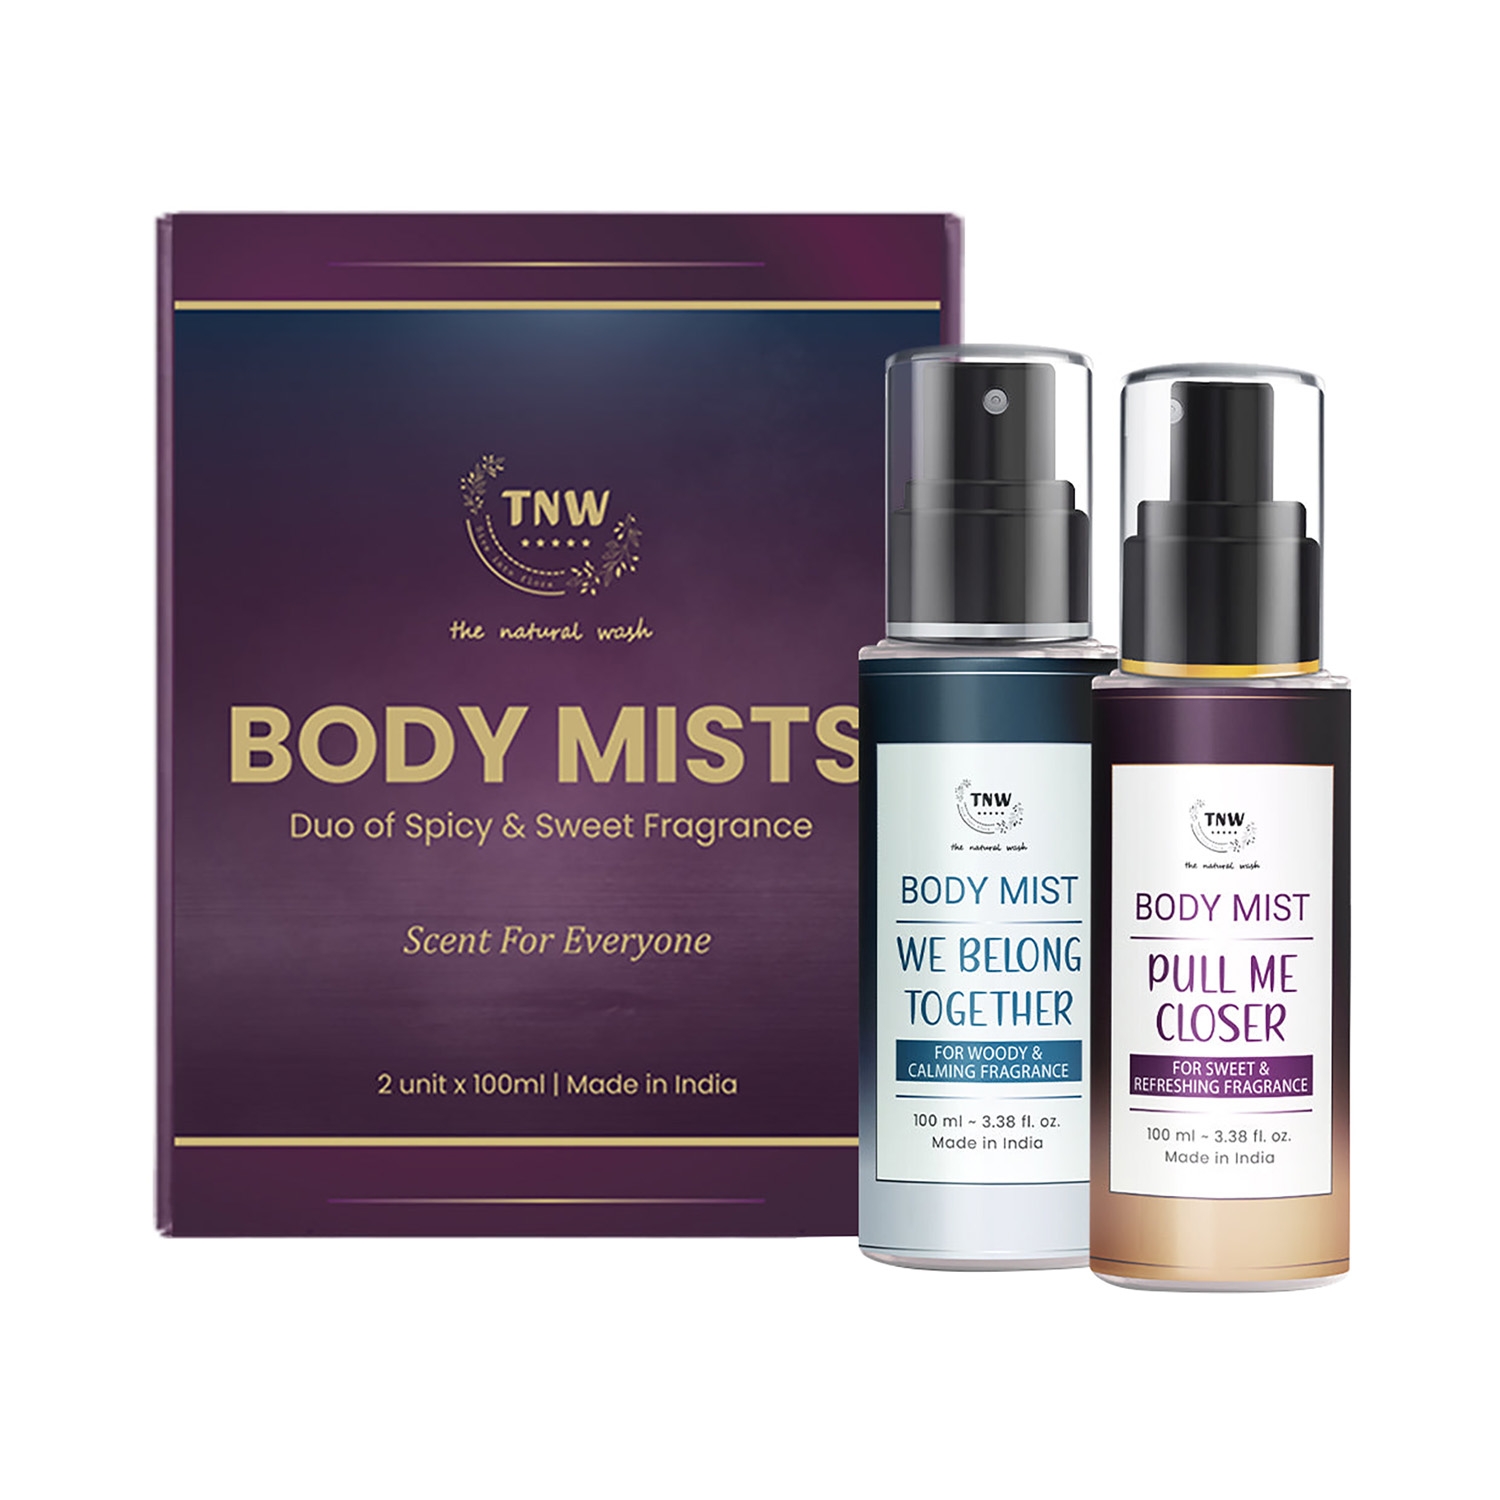 TNW The Natural Wash Body Mists Duo Of Sweet & Spicy Fragrance (200ml)